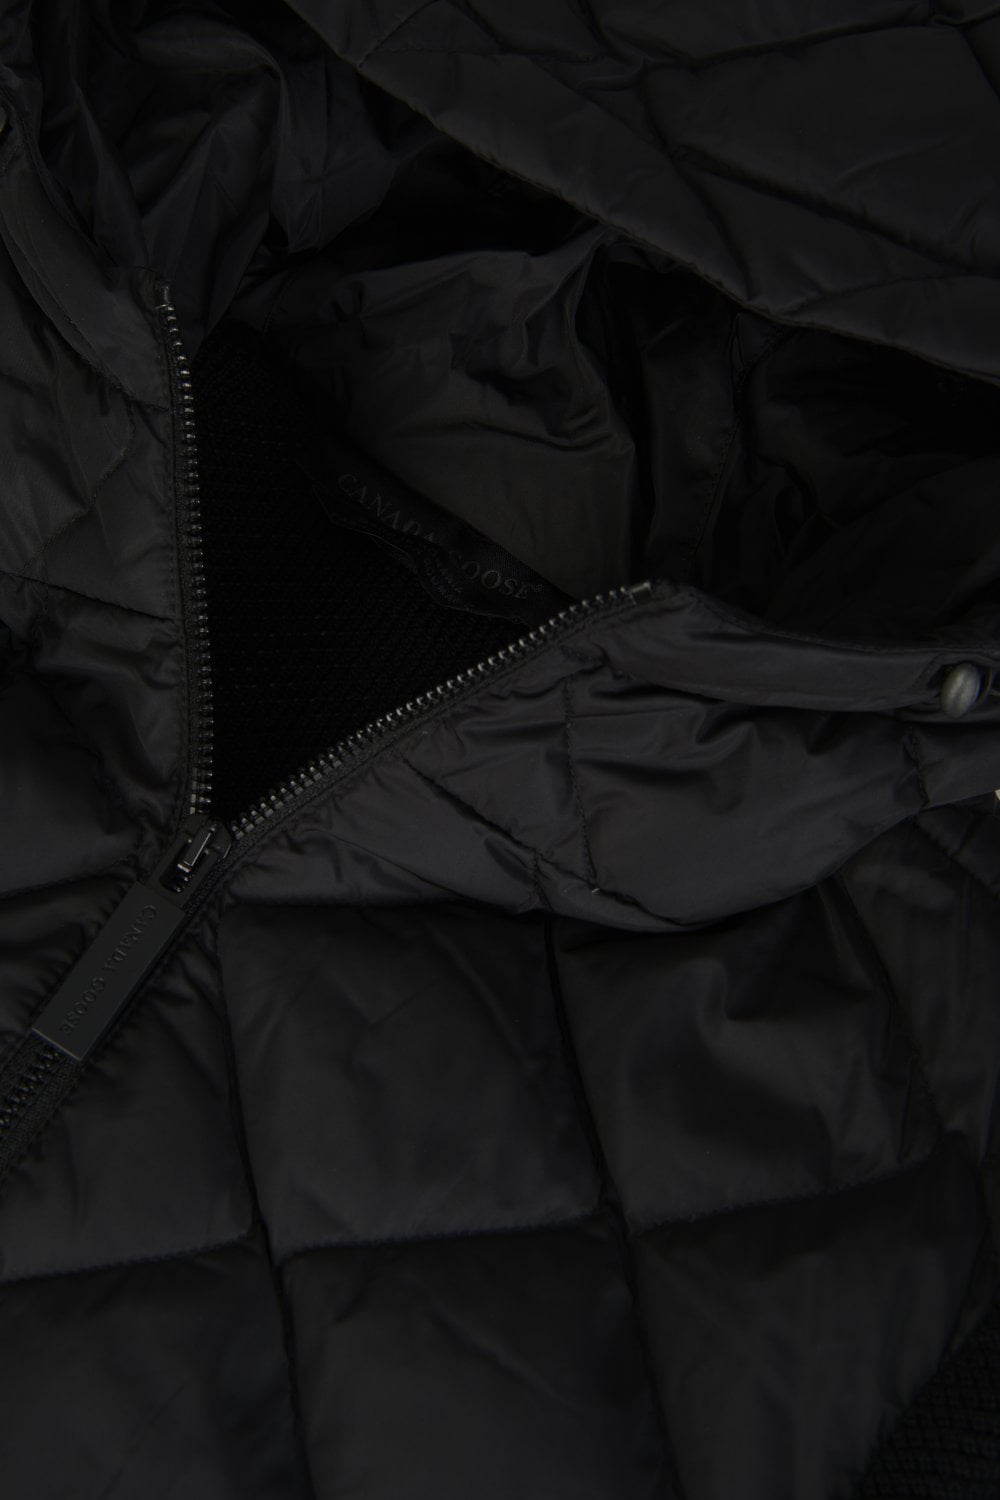 Canada Goose HyBridge Quilted Knit Hoody in Black 6800L (Women)